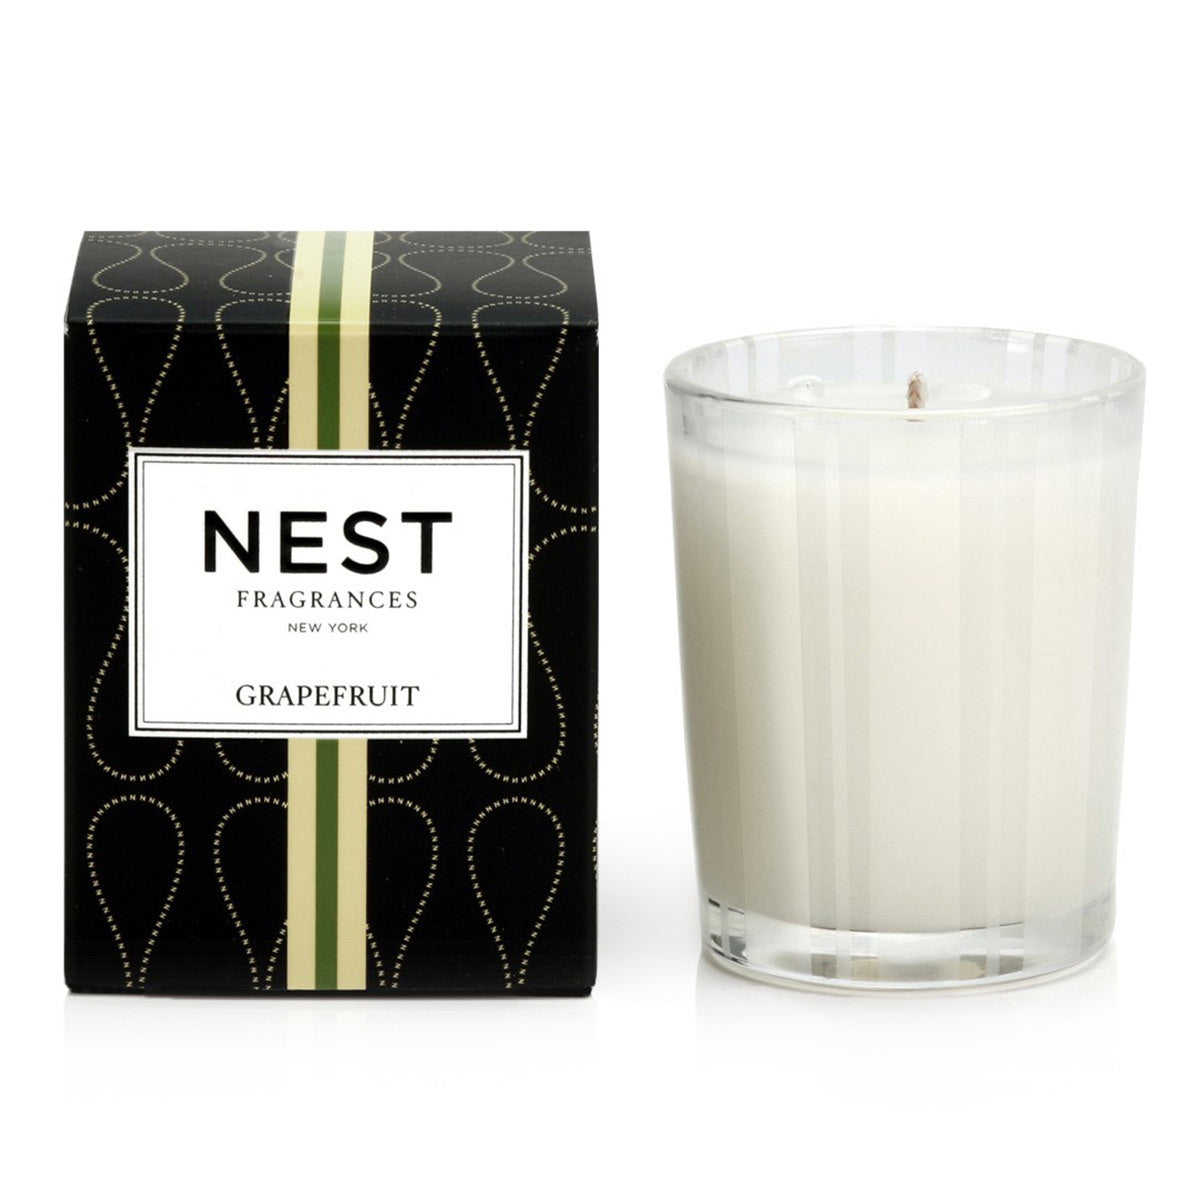 Primary image of Grapefruit Candle